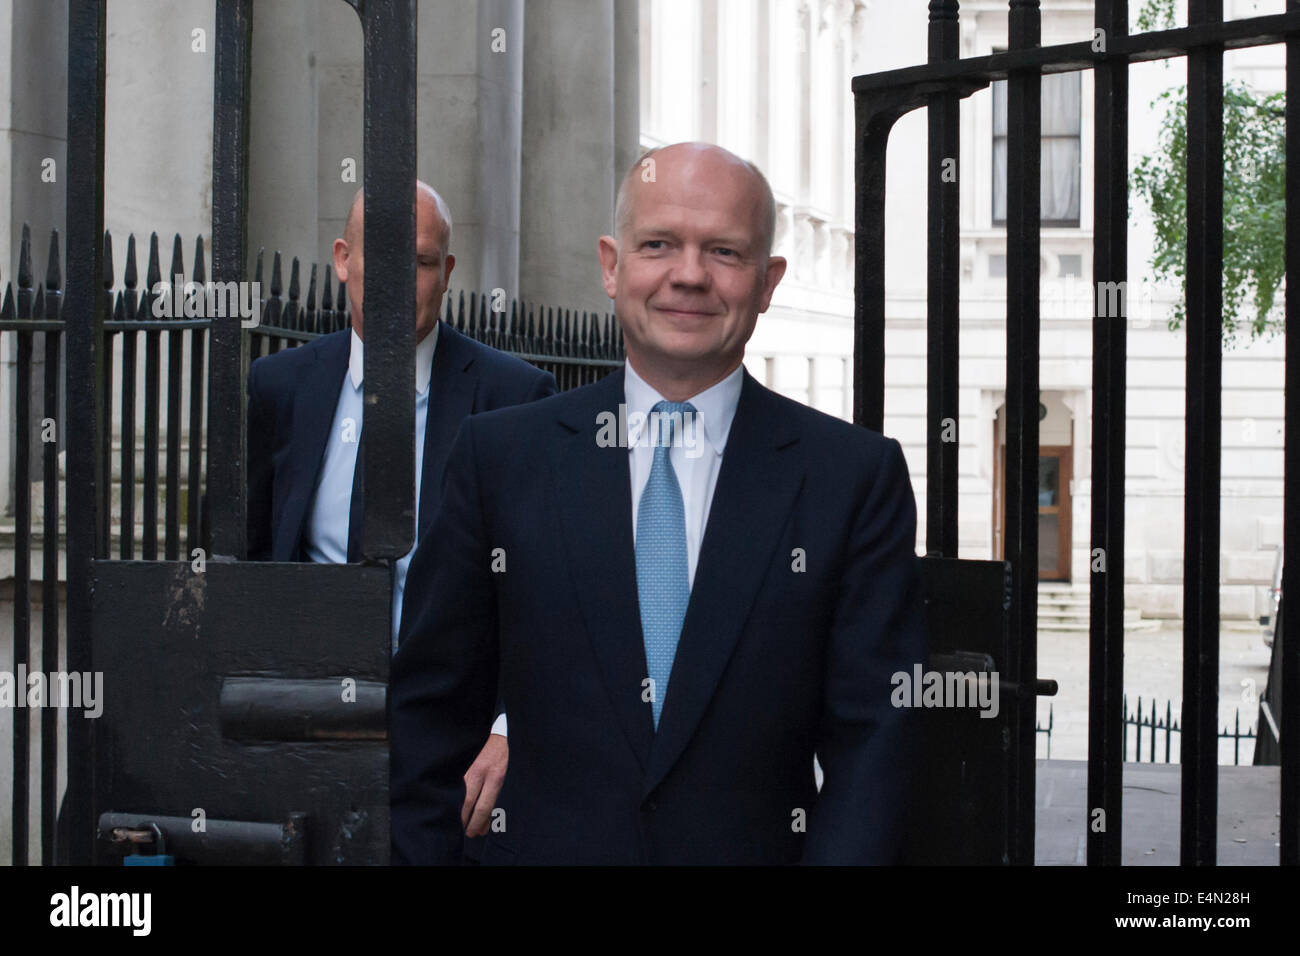 Downing Street, London, UK. 15th July 2014. Reshuffled Cabinet arrive at Downing Street in London for their weekly meeting. Pictured: William Hague MP. Credit:  Lee Thomas/Alamy Live News Stock Photo